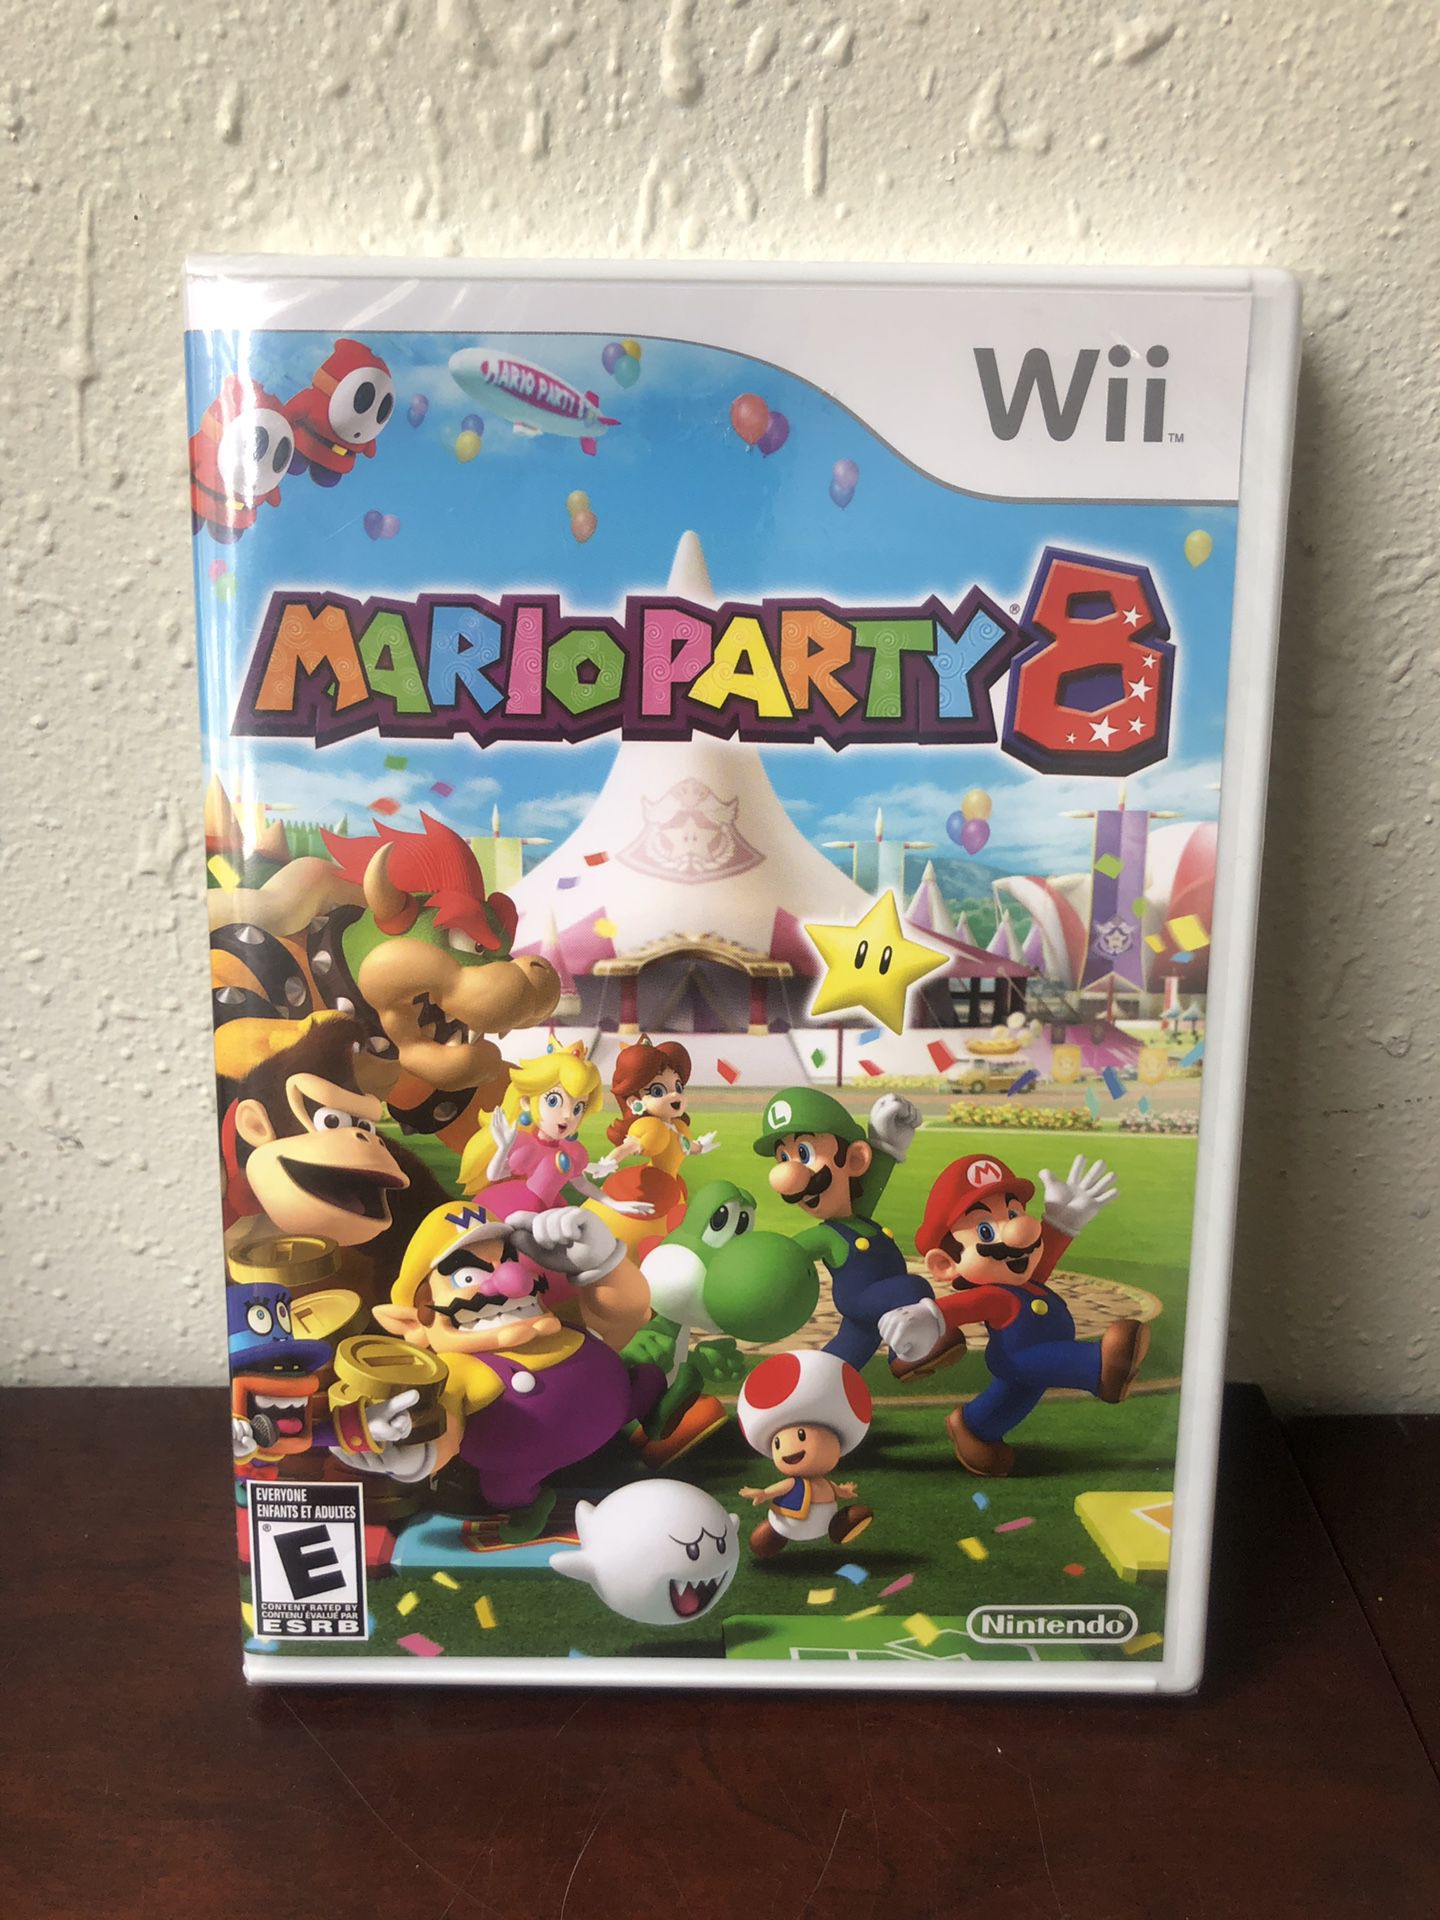 Mario party 8 brand new sealed